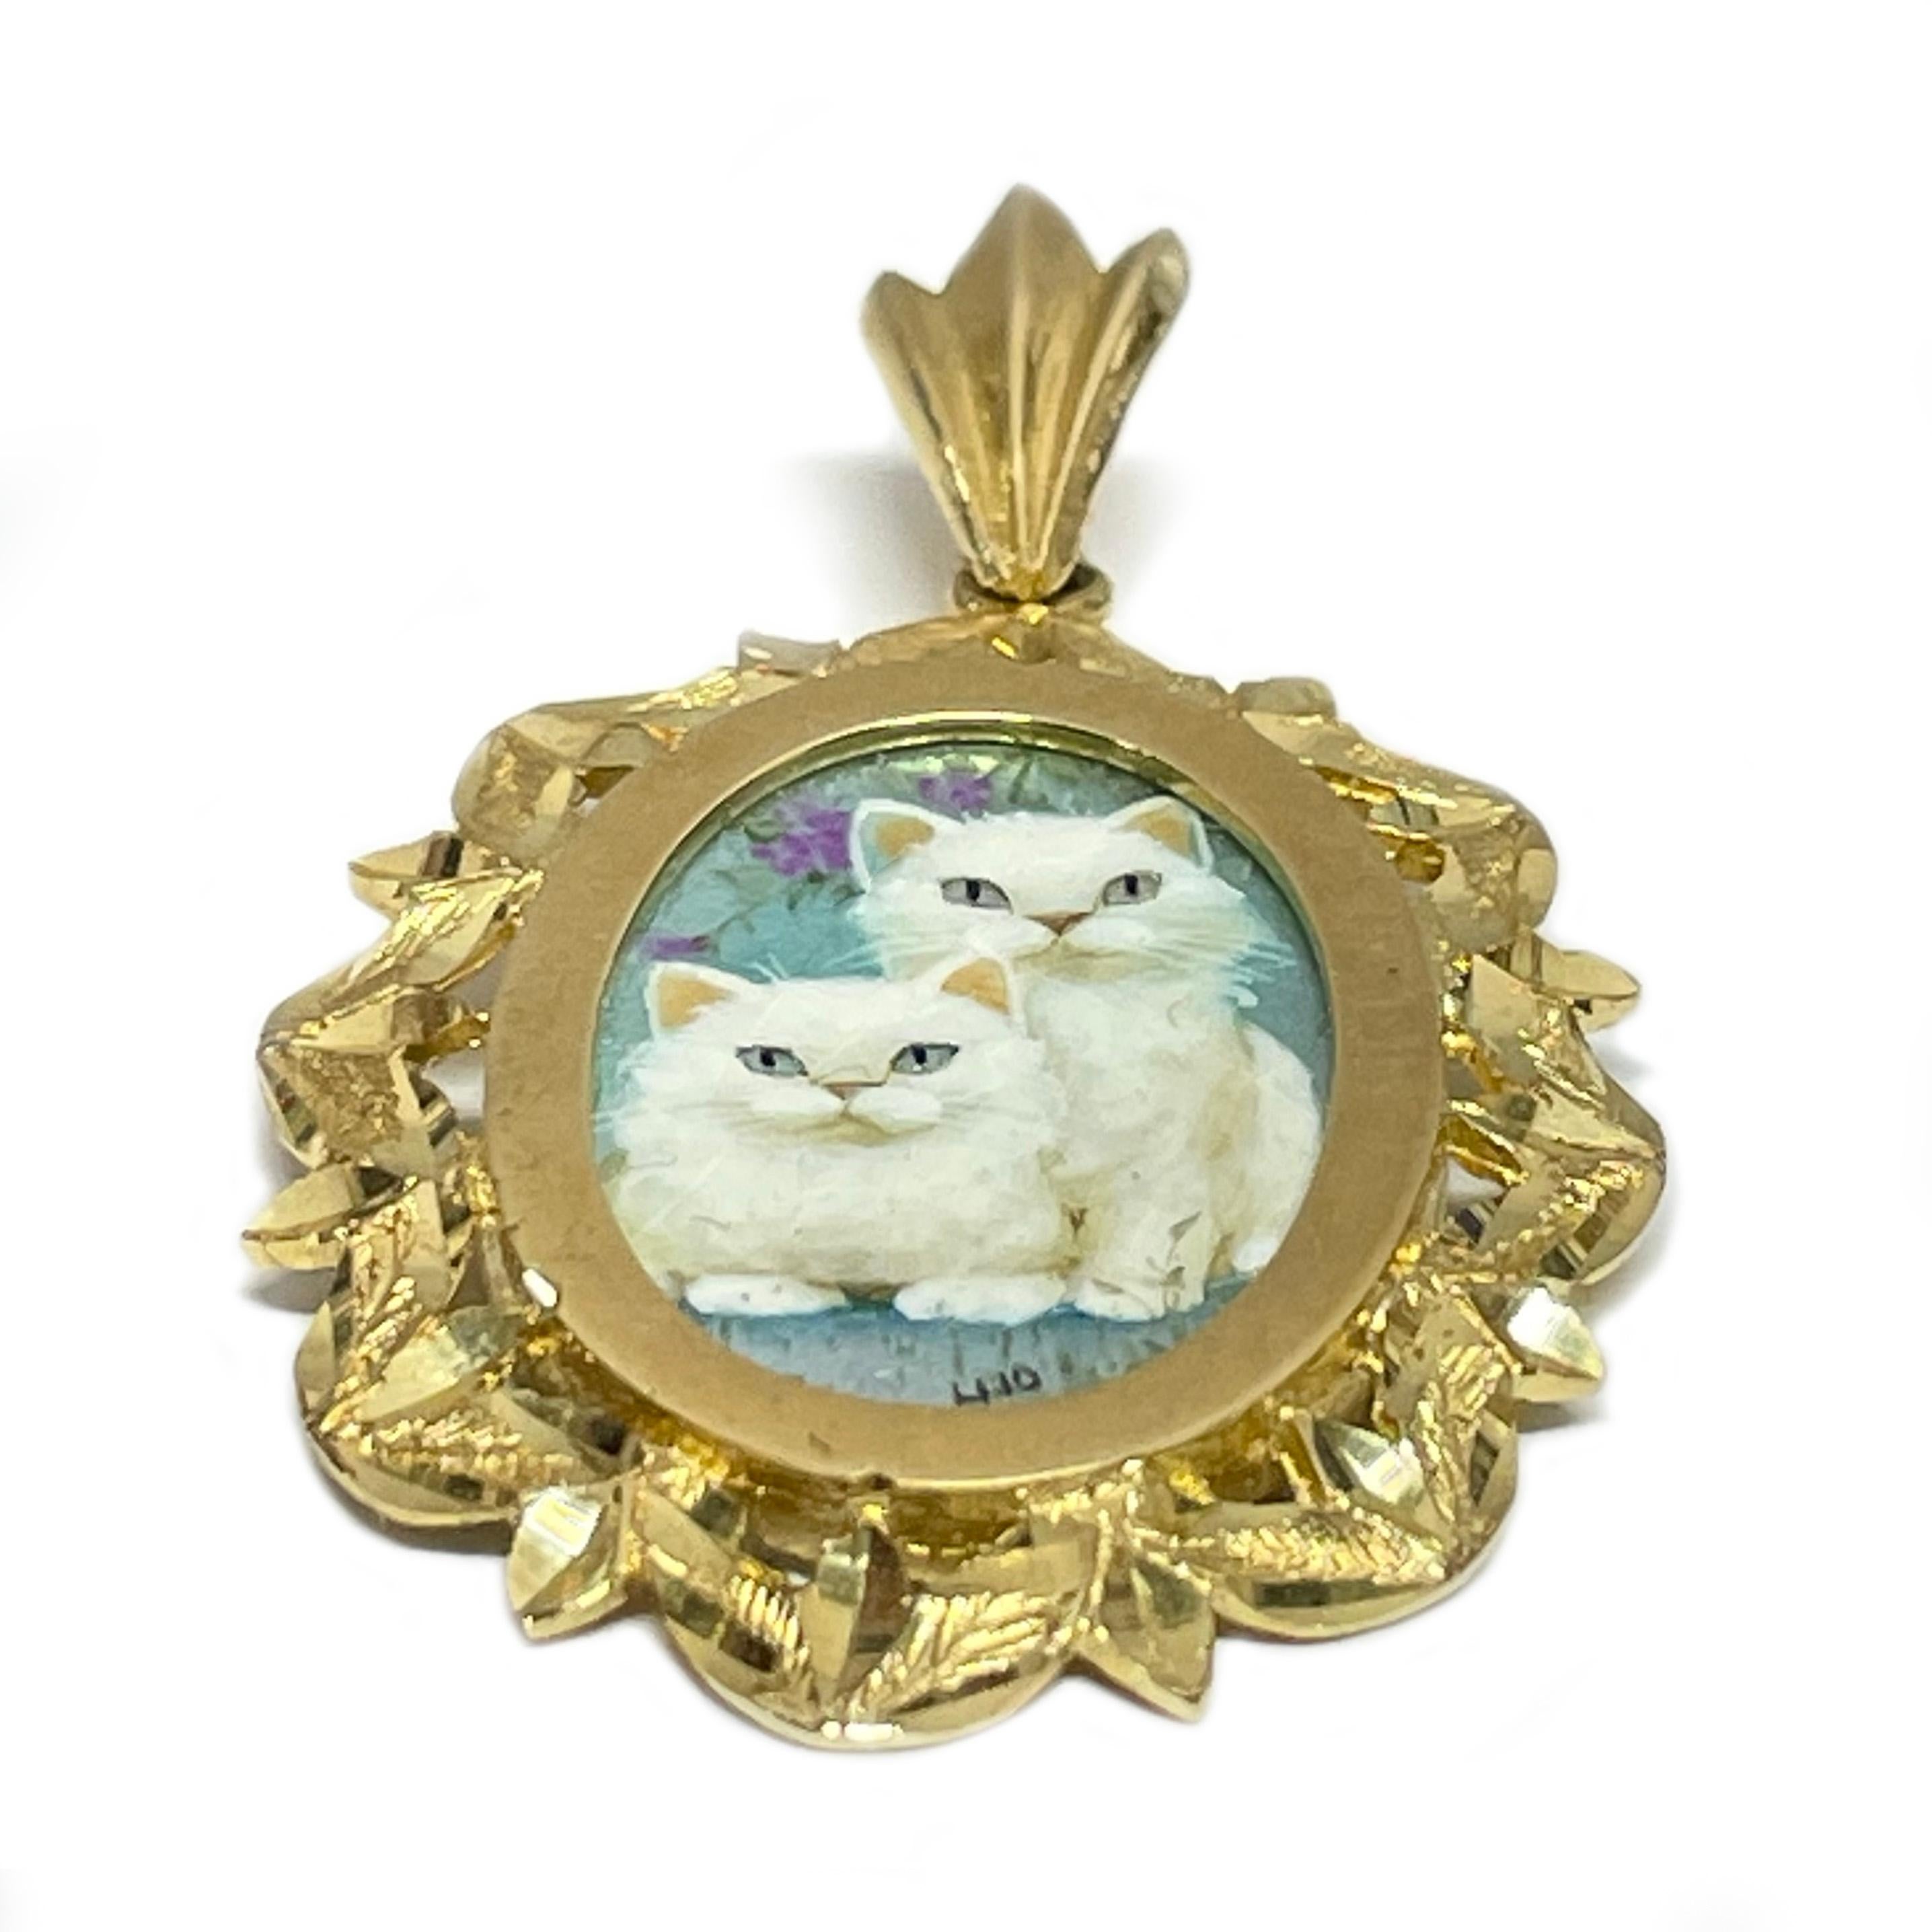 14 Karat Yellow Gold Two White Cats Hand Painted on a Mother of Pearl Pendant. The miniature painting is set in a 14 karat gold ornate oval frame with diamond-cut details. The painting is signed by the master artist, Luo-Afi-Ping and includes a